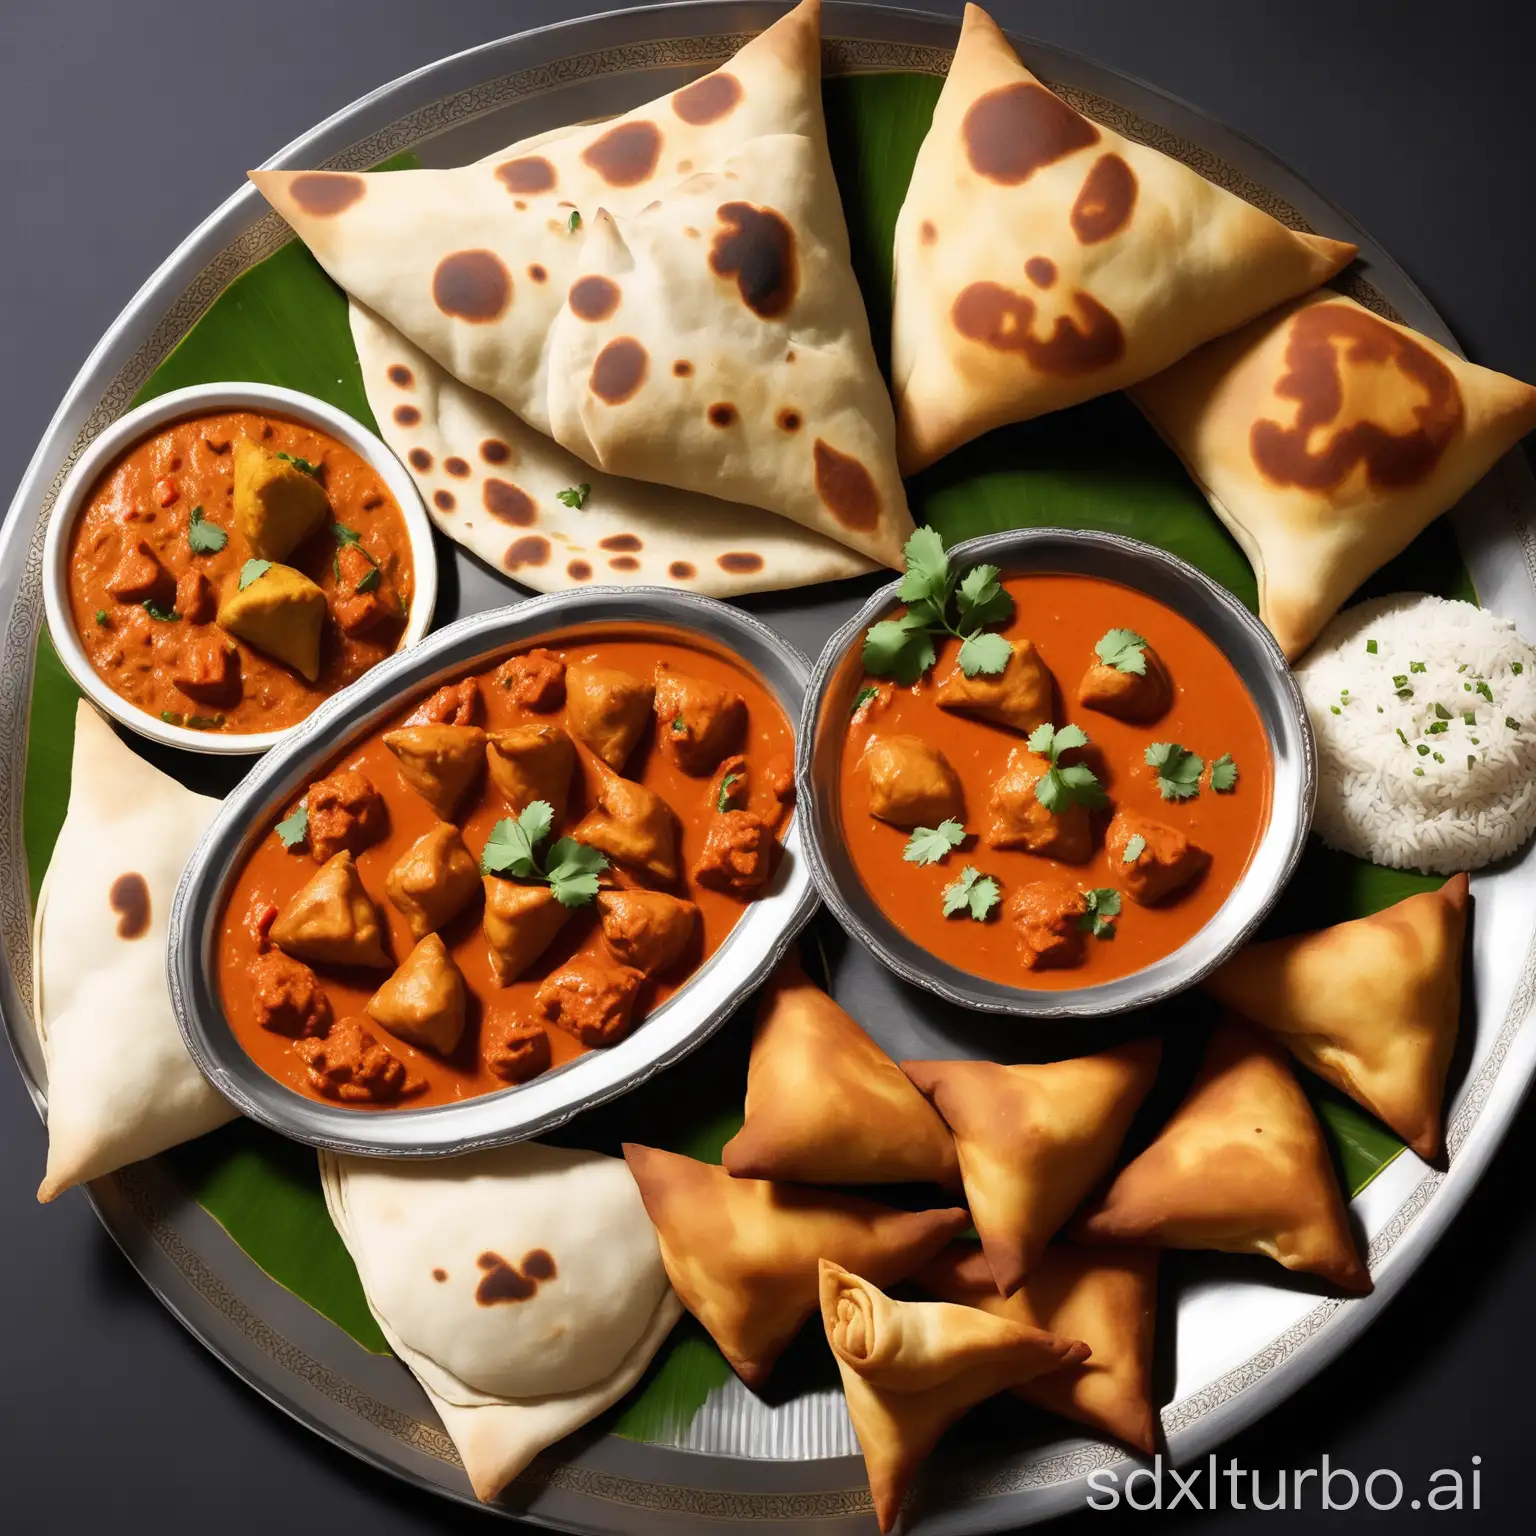 Assorted-Traditional-Indian-Dishes-Chicken-Tikka-Masala-Samosas-Naan-and-More